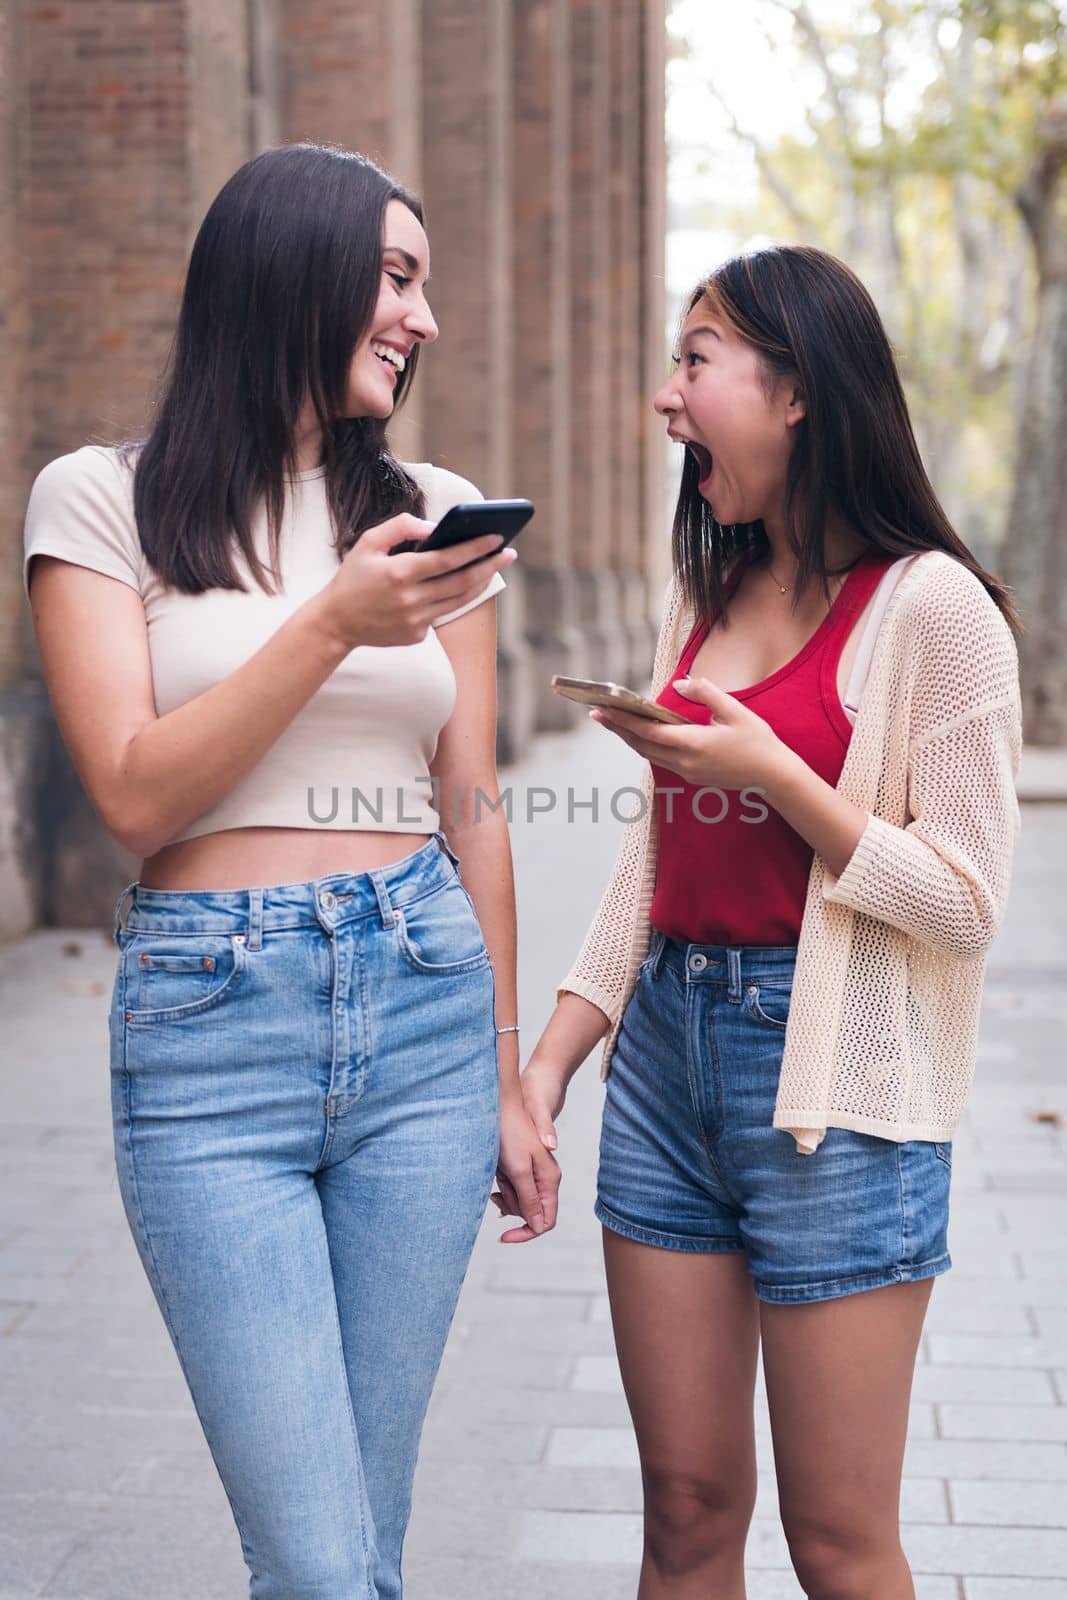 two young women sharing confidences and having fun with their cell phones while walking through the city holding hands, concept of friendship and love between people of the same sex